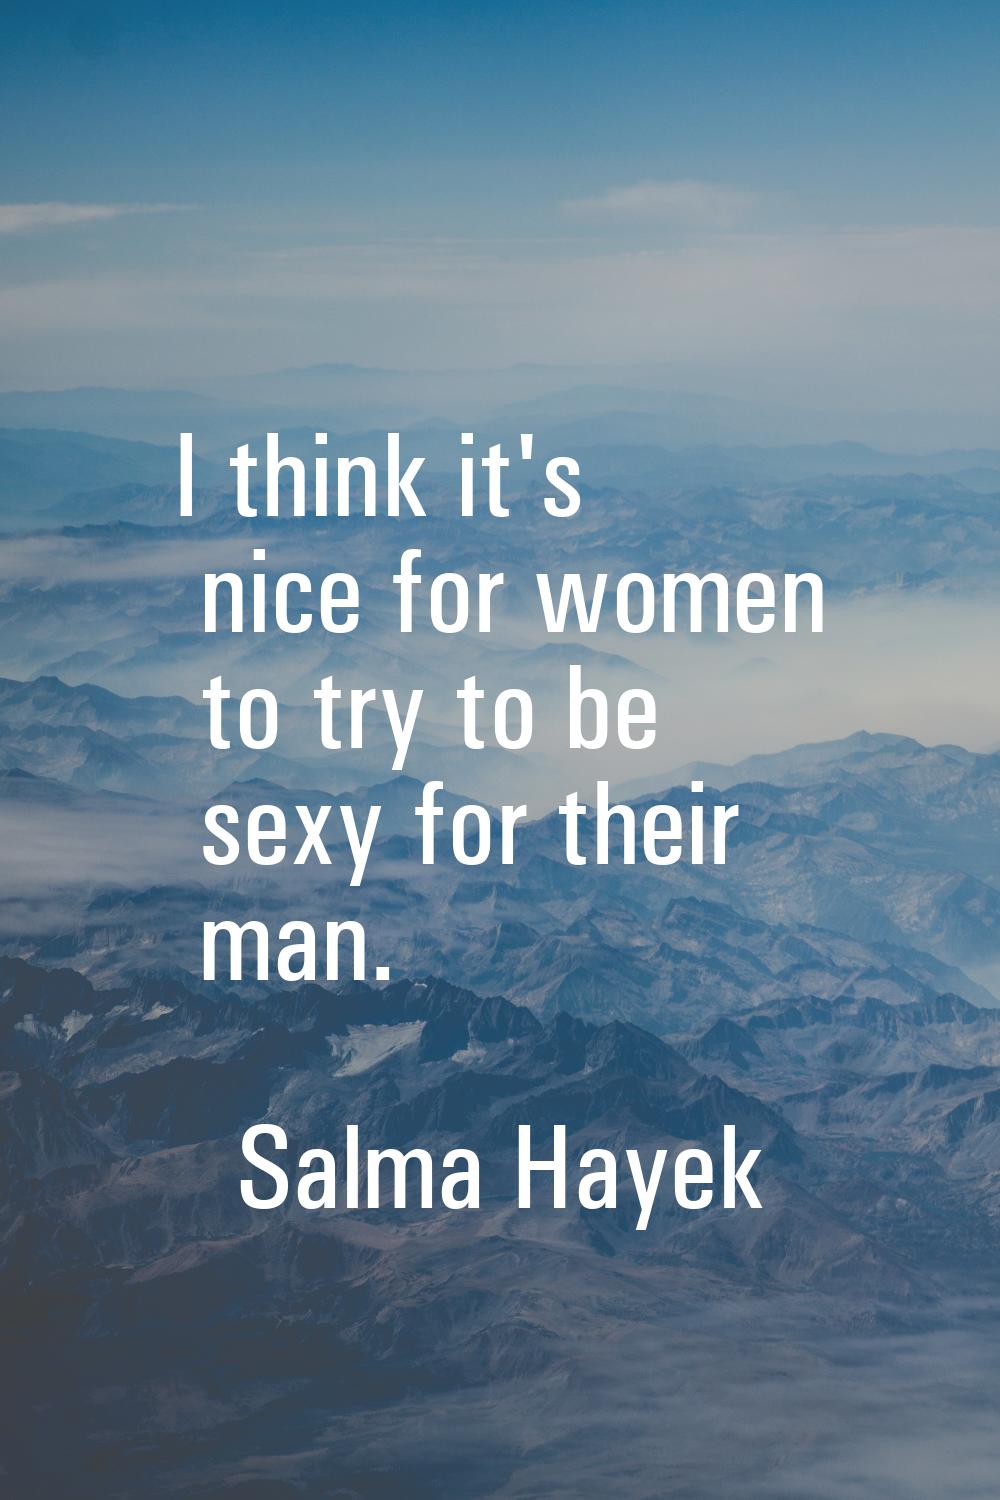 I think it's nice for women to try to be sexy for their man.